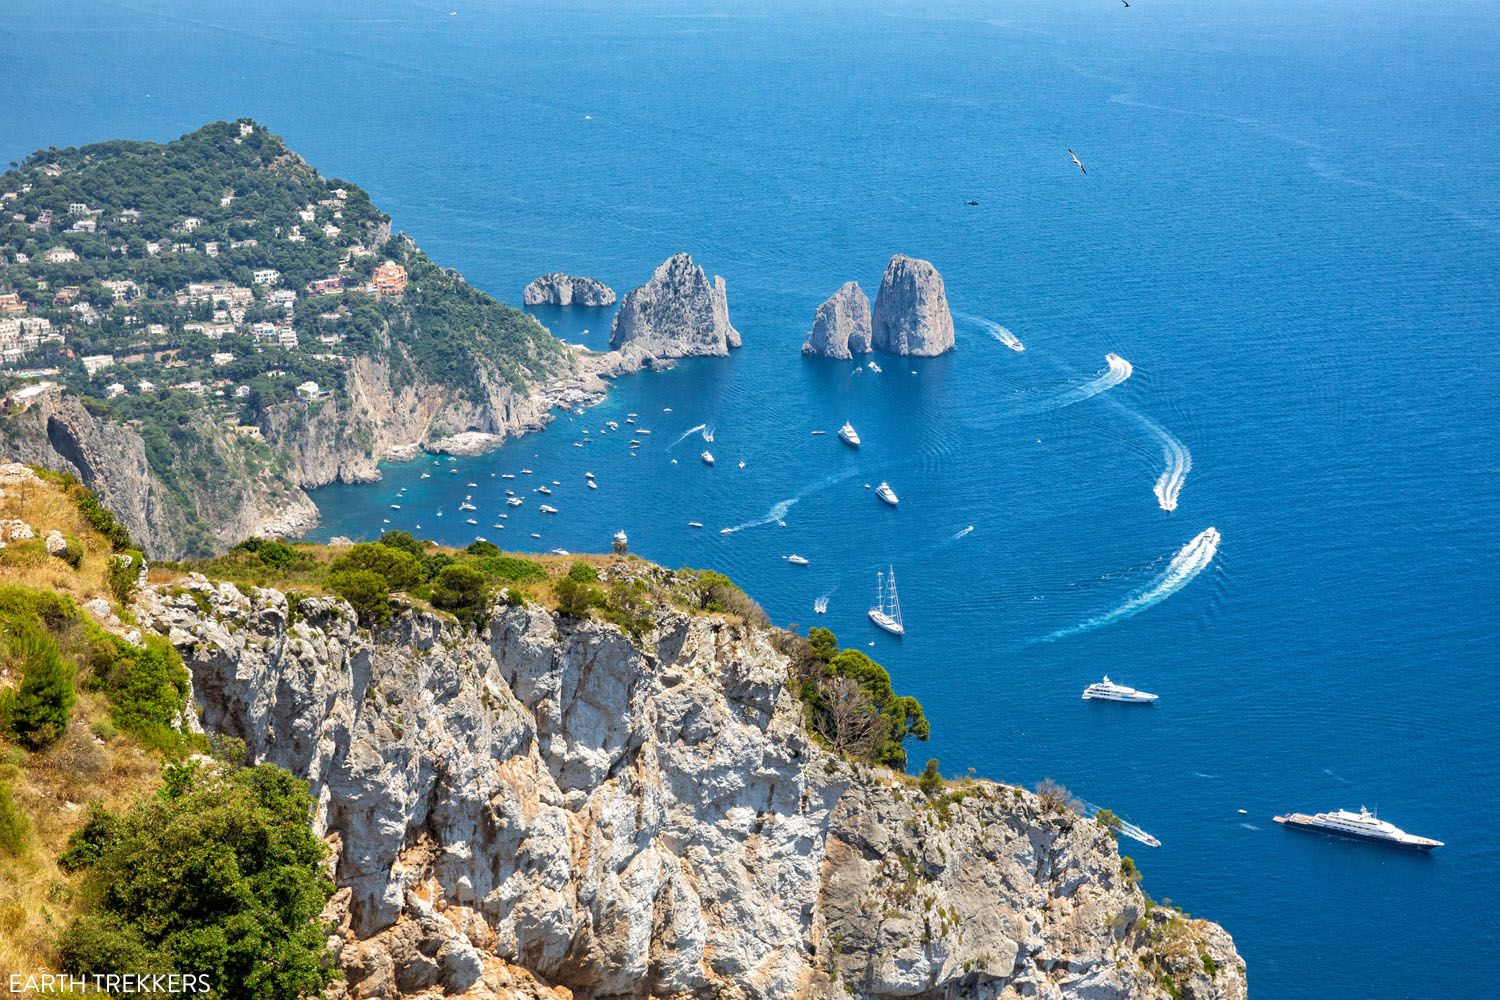 Not only the Blue Grotto, here are the 3 caves of Capri that you